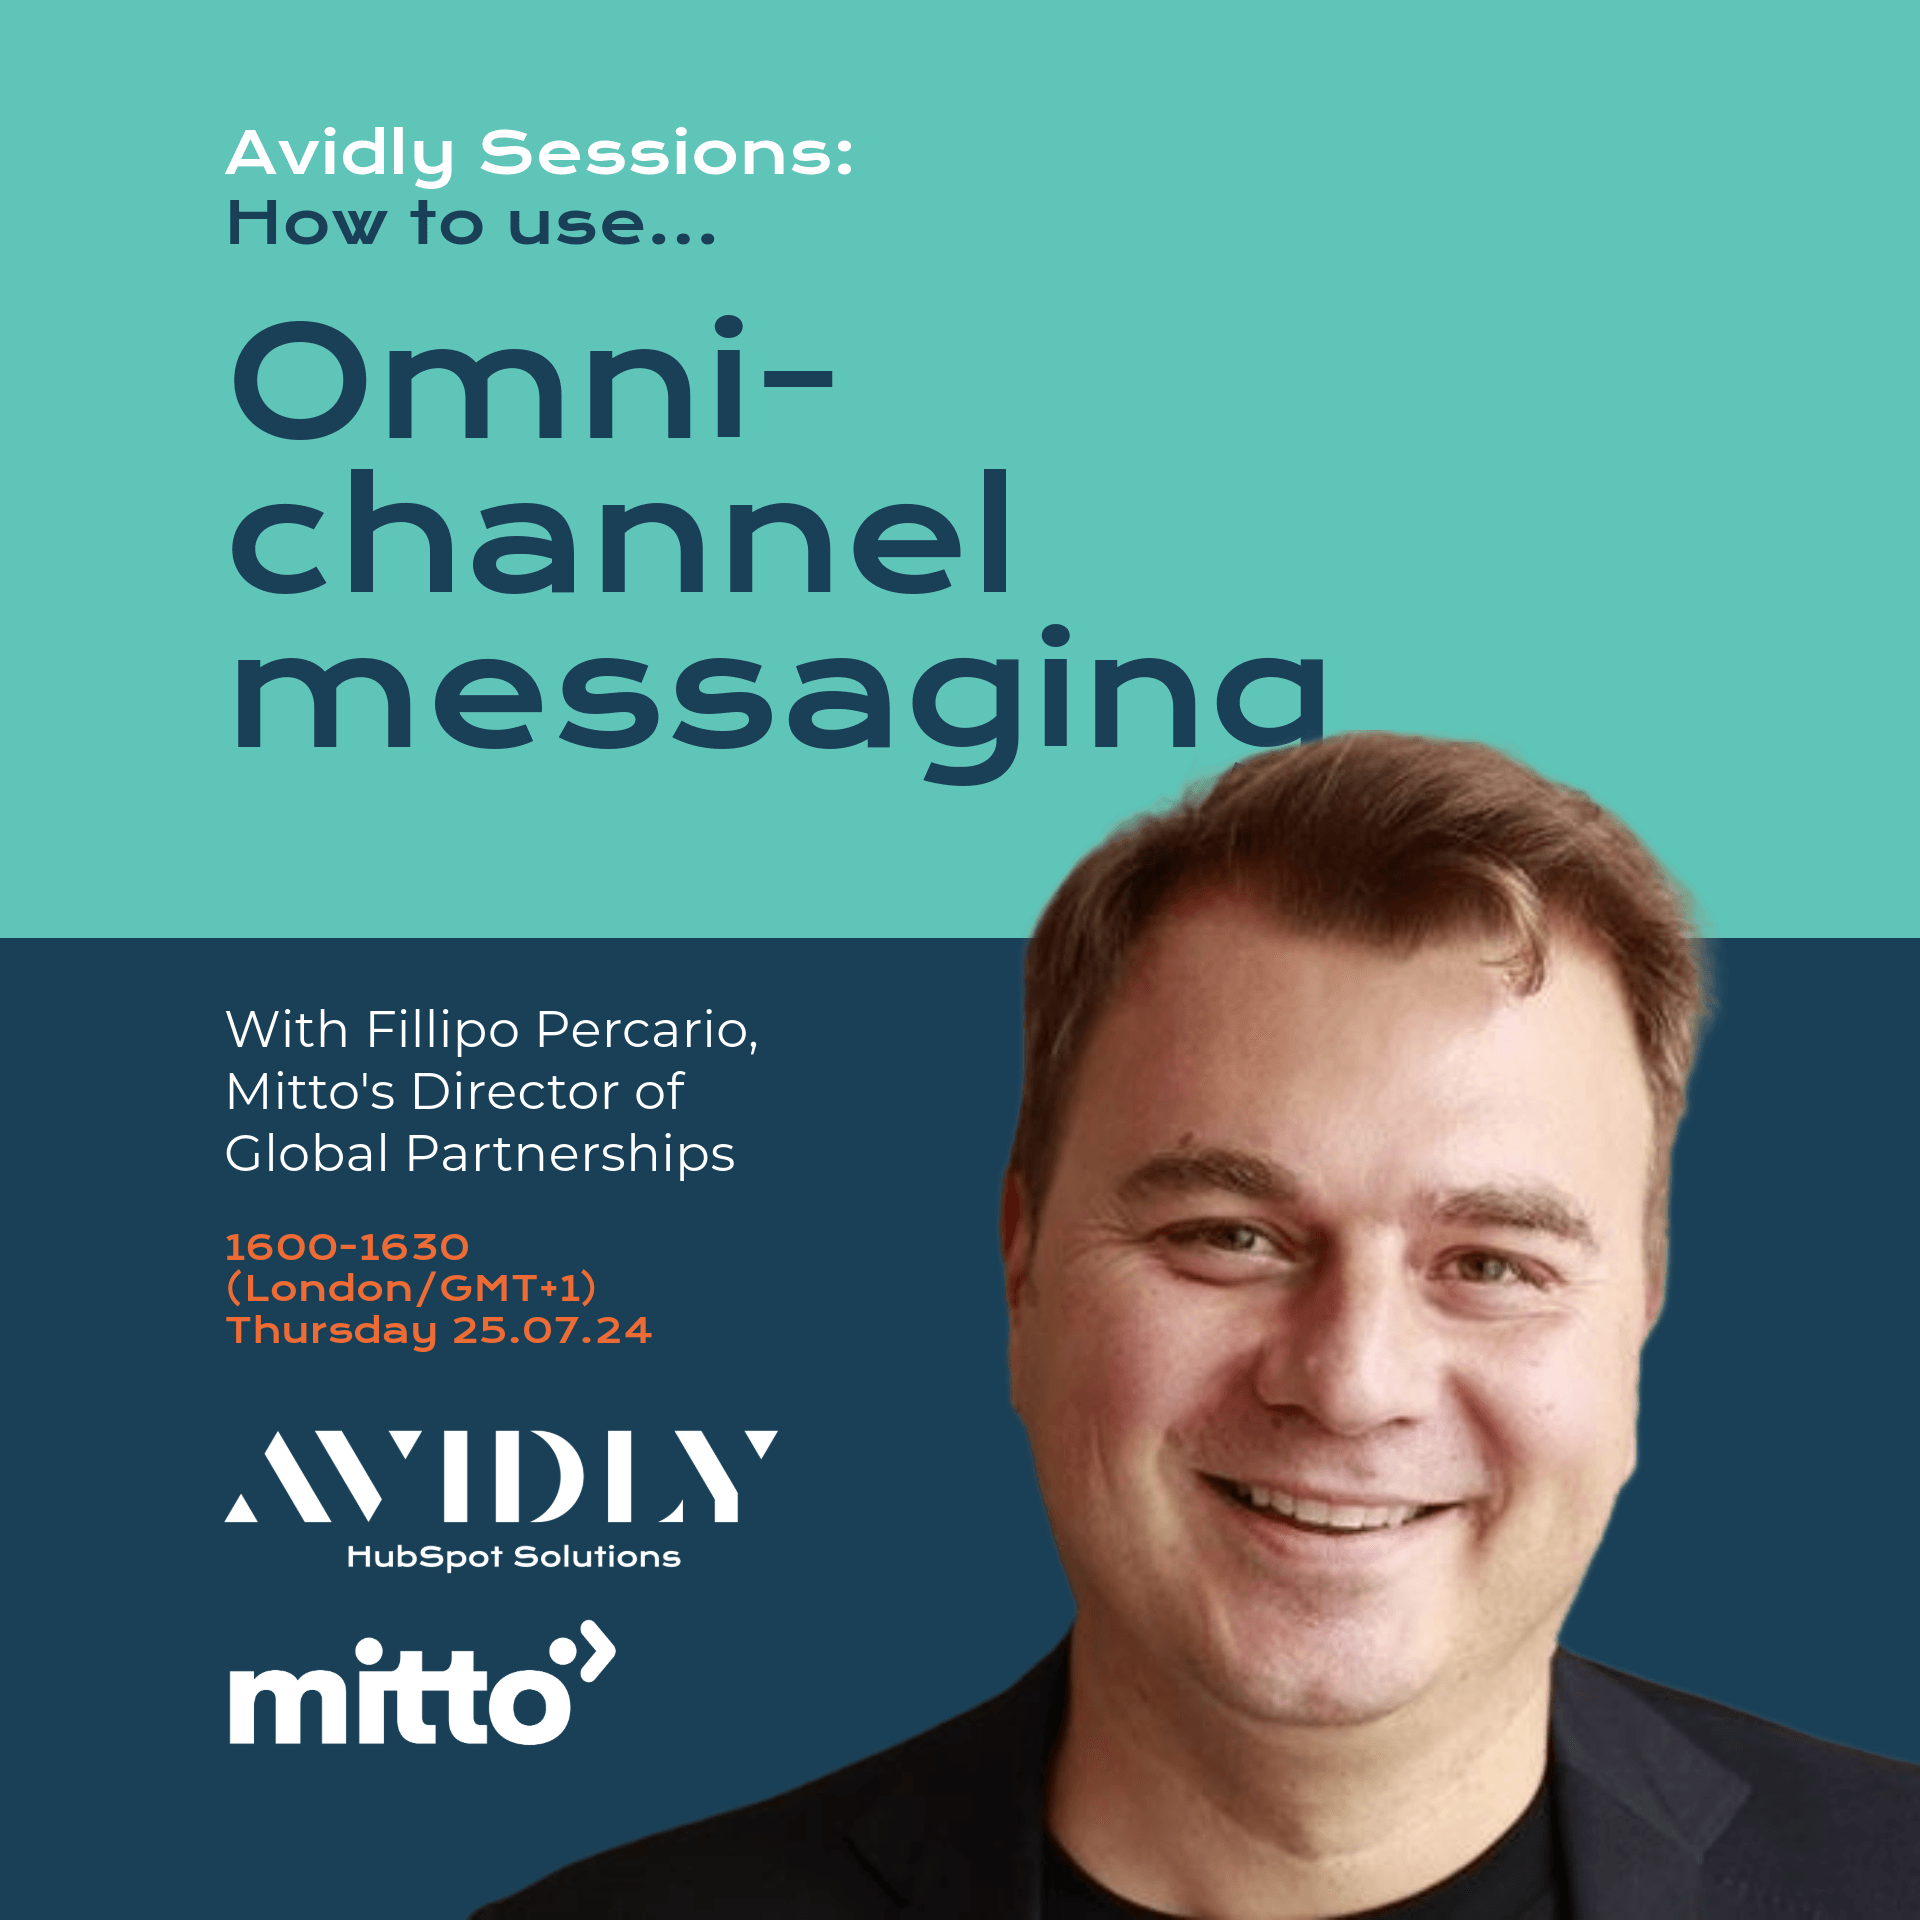 Avidly Sessions How to overview full series image-14-Avidly Sessions Omnichannel with Mitto 1080x1920